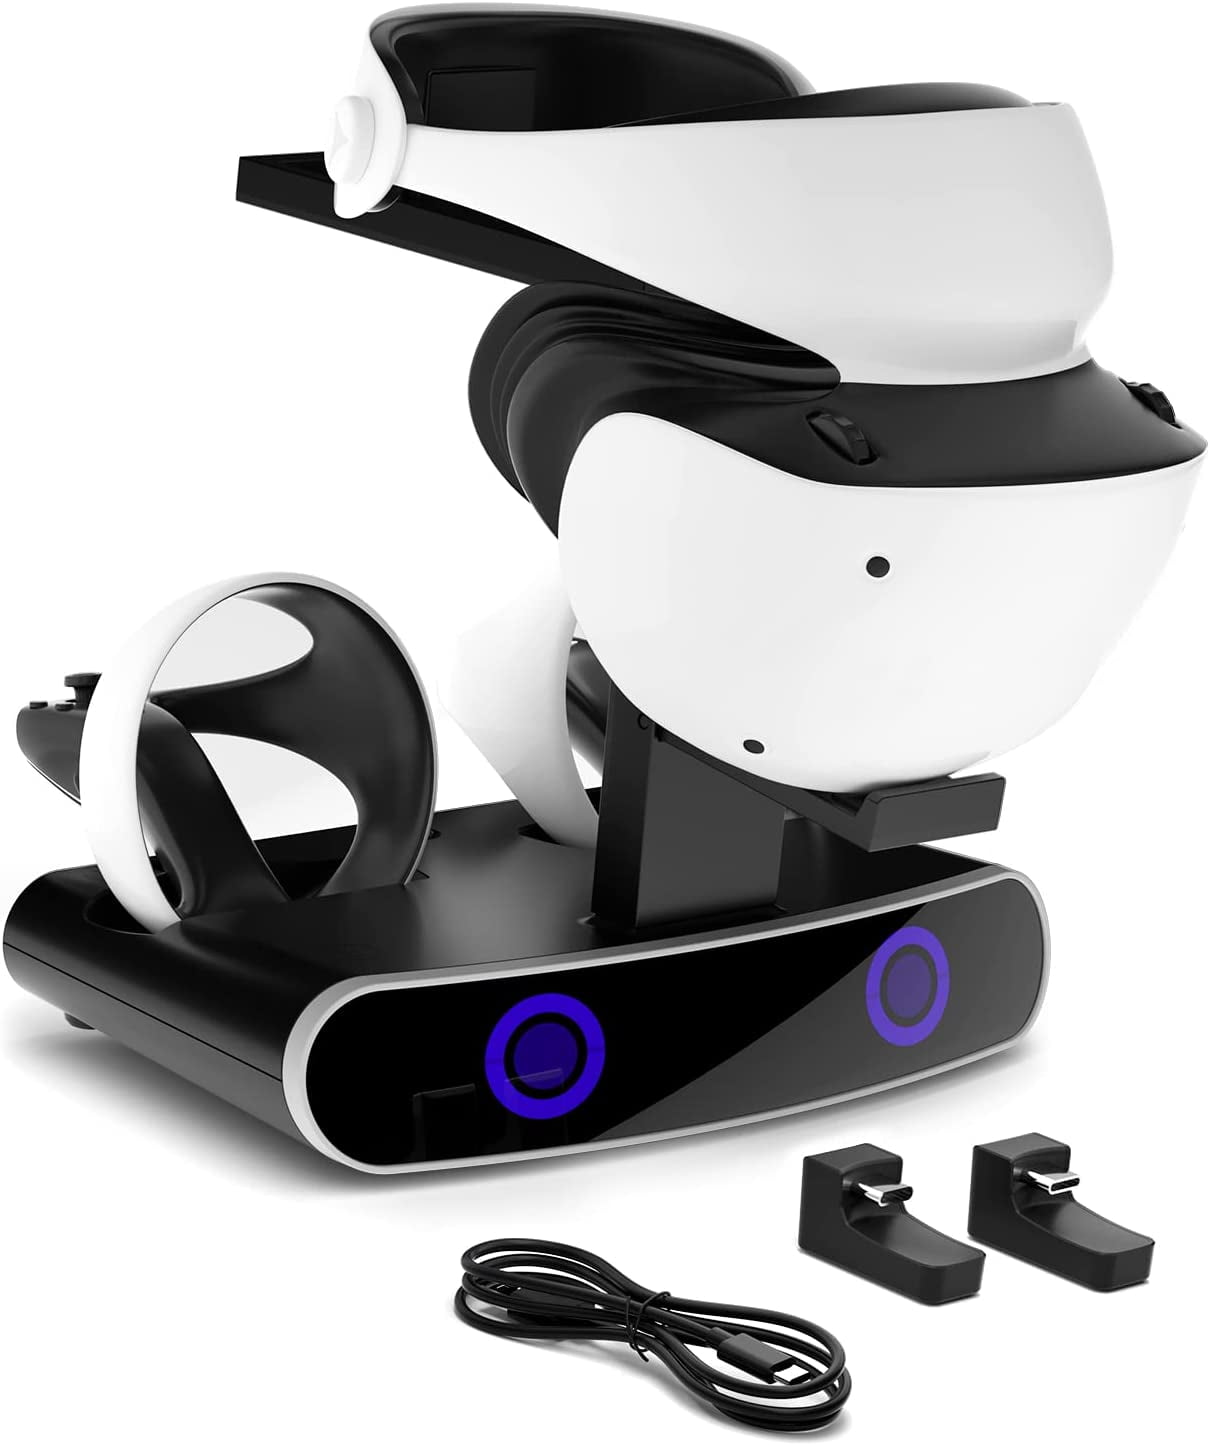 Bolt Typisk Reception PSVR Stand - Charge, Showcase, and Display your PS4 VR Headset and  Processor - Compatible with Playstation 4 PSVR - Walmart.com